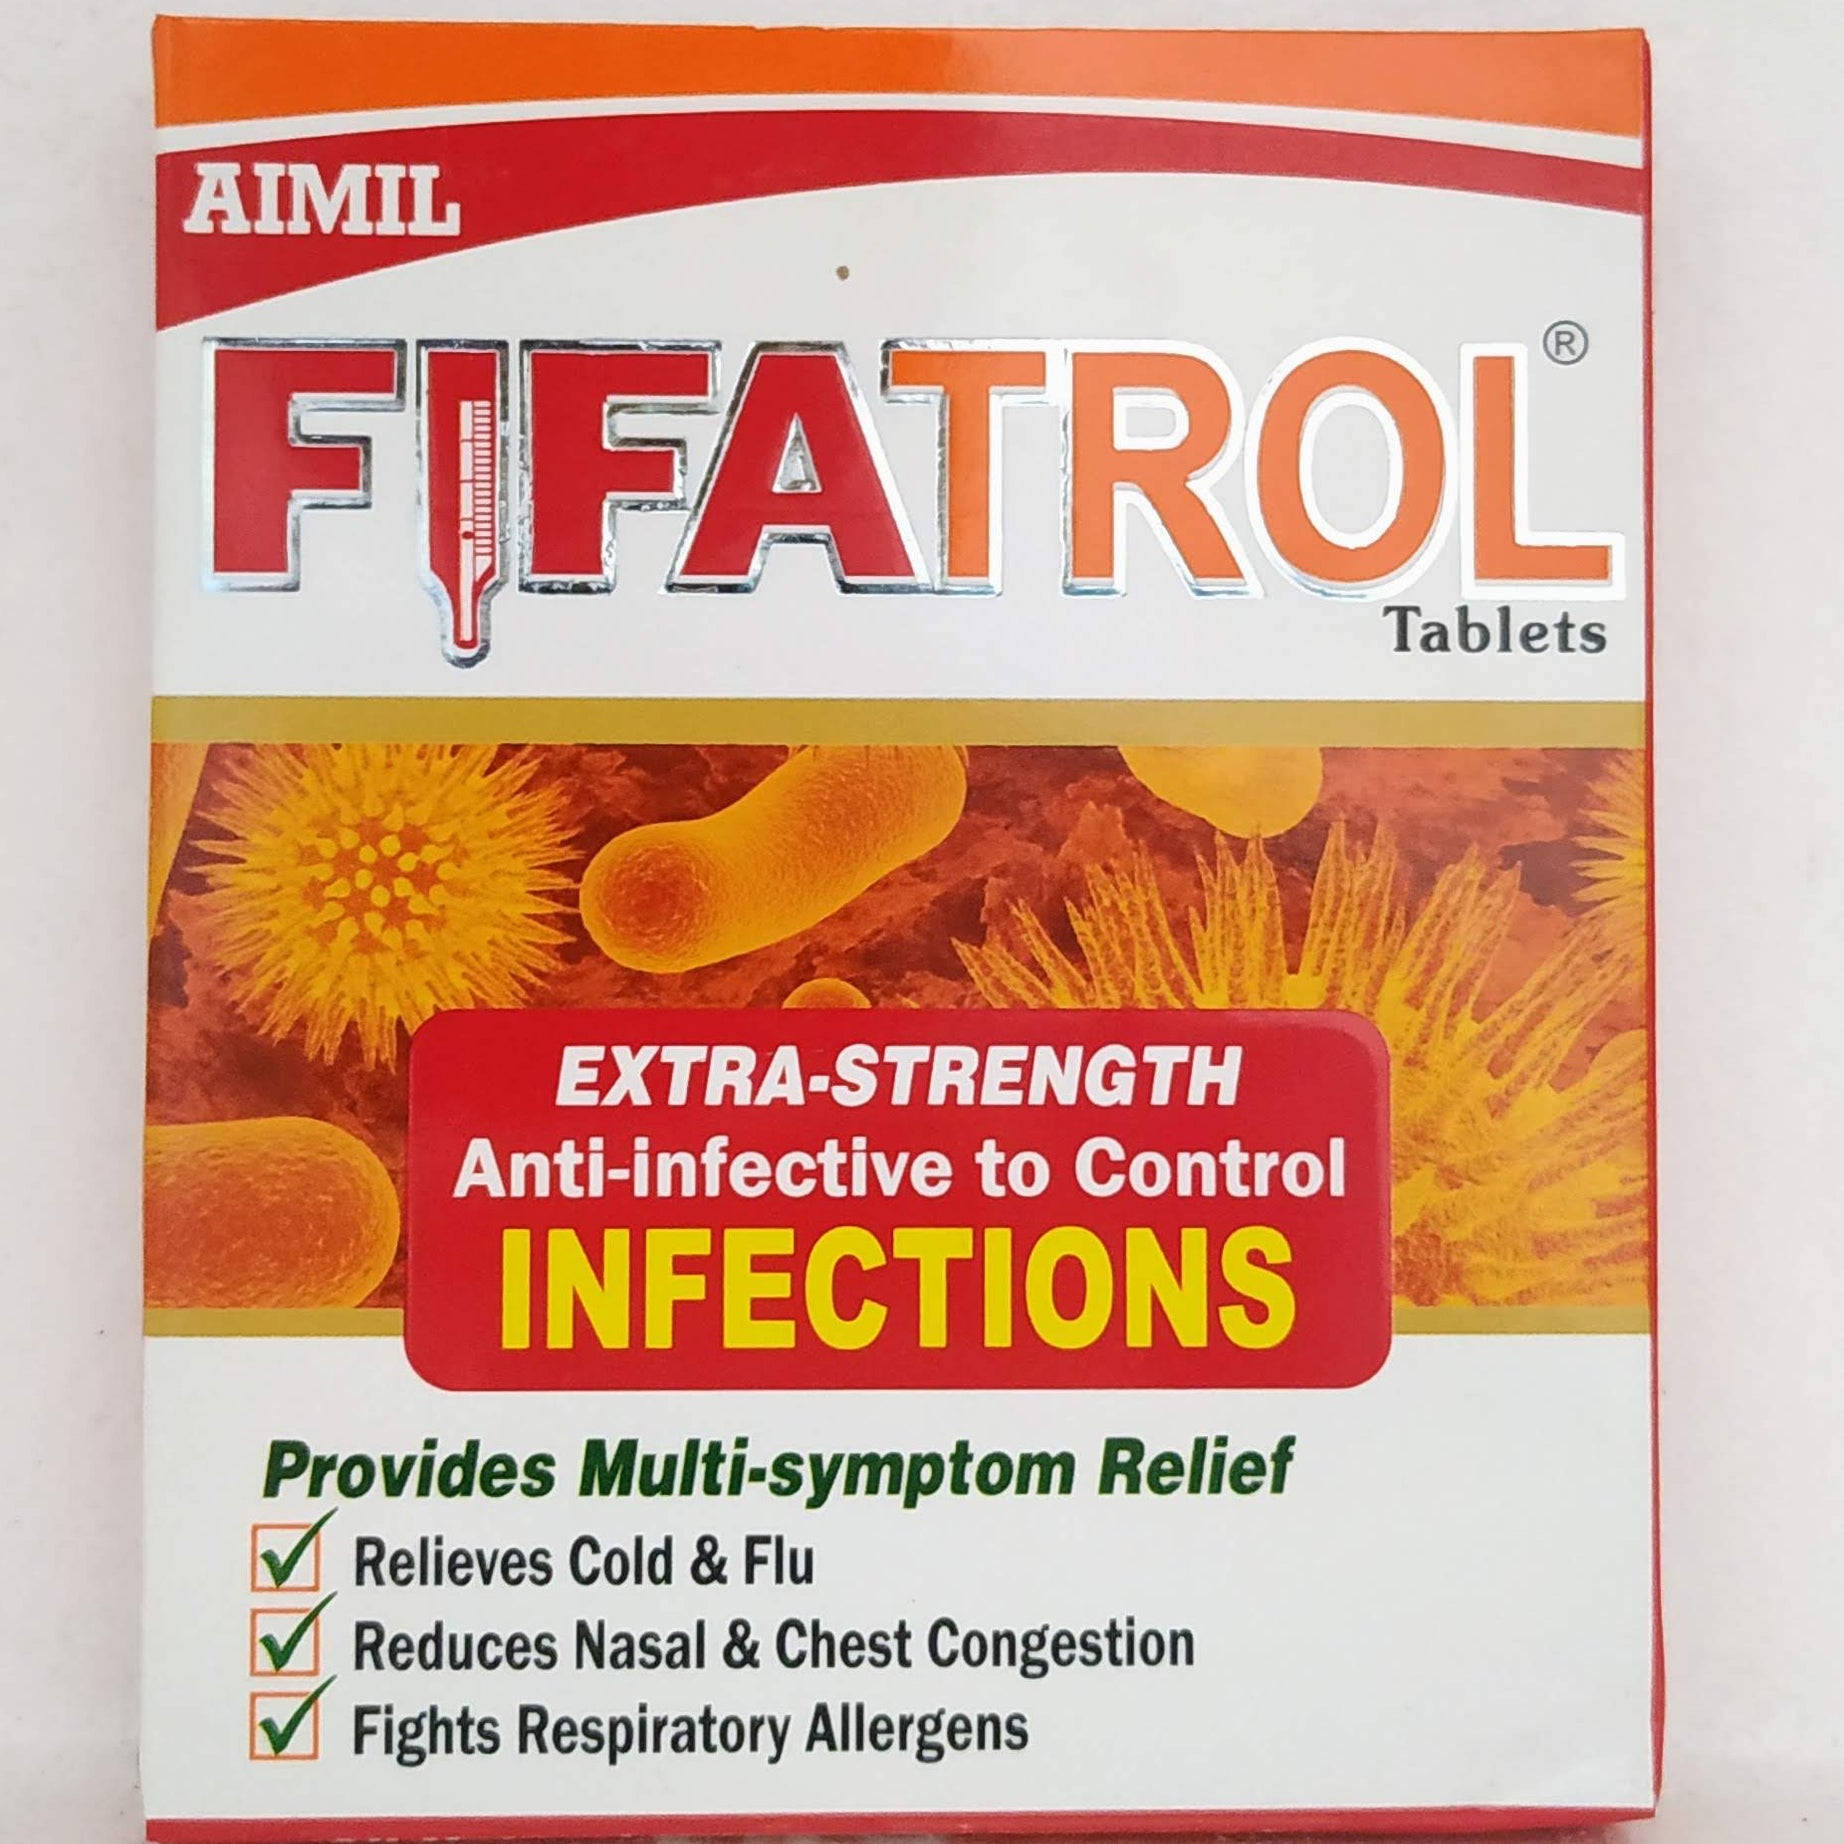 Shop Fifatrol tablets - 30Tablets at price 203.00 from Aimil Online - Ayush Care